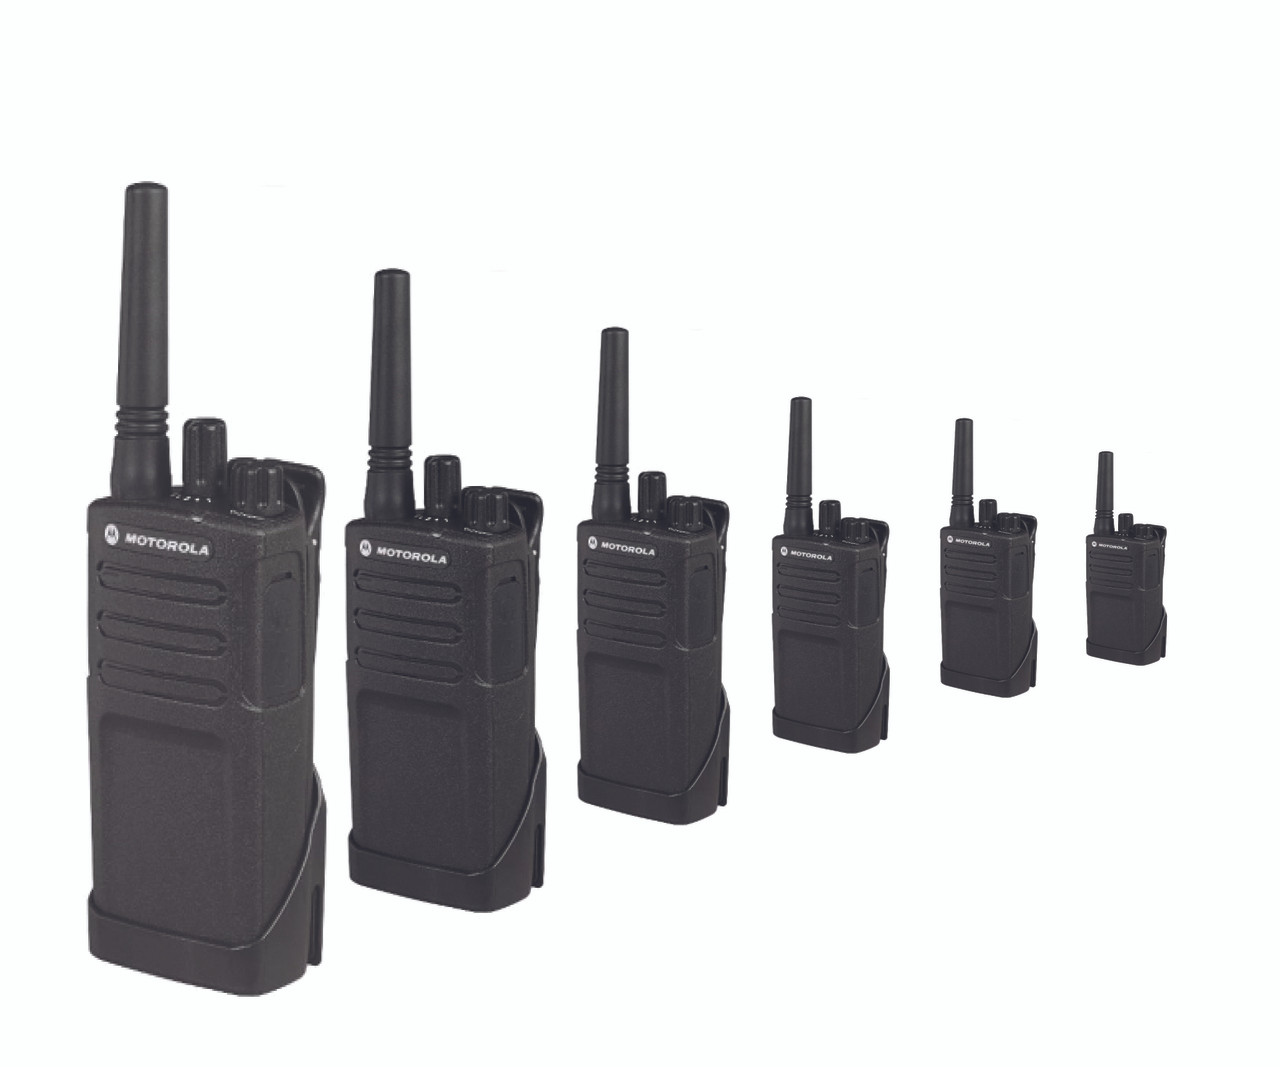 A Six Pack of Motorola RMU2040 UHF Two Way Radios for 2W 4CH Handheld  Portable walkie talkie for the Construction, Warehouse, Hotel Industry